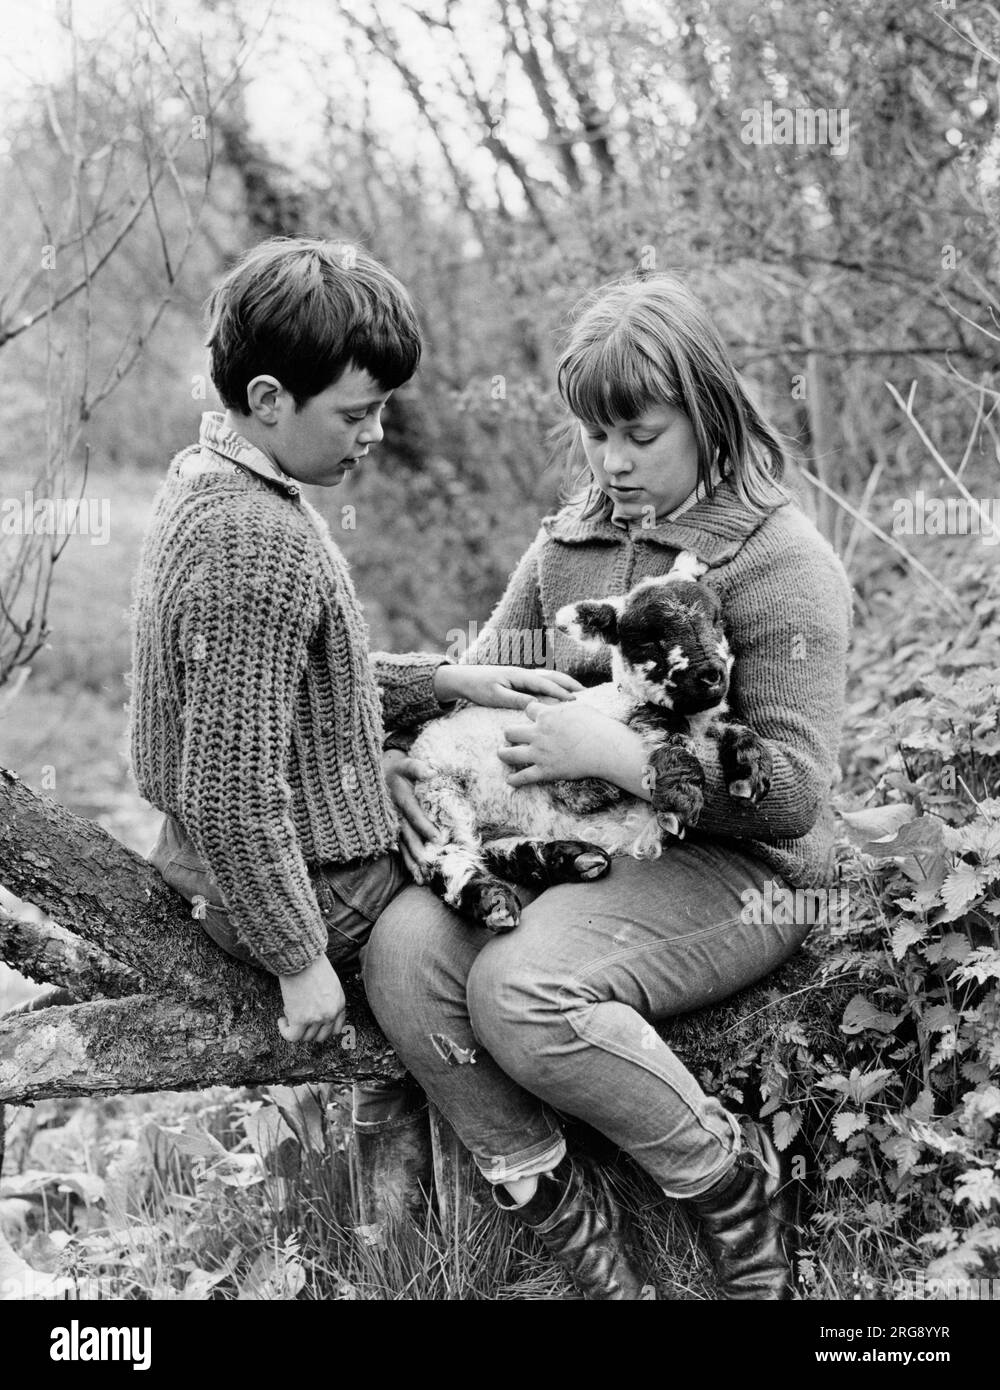 A boy and girl sit on a fallen tree holding a lamb who looks quite comfortable. Stock Photo